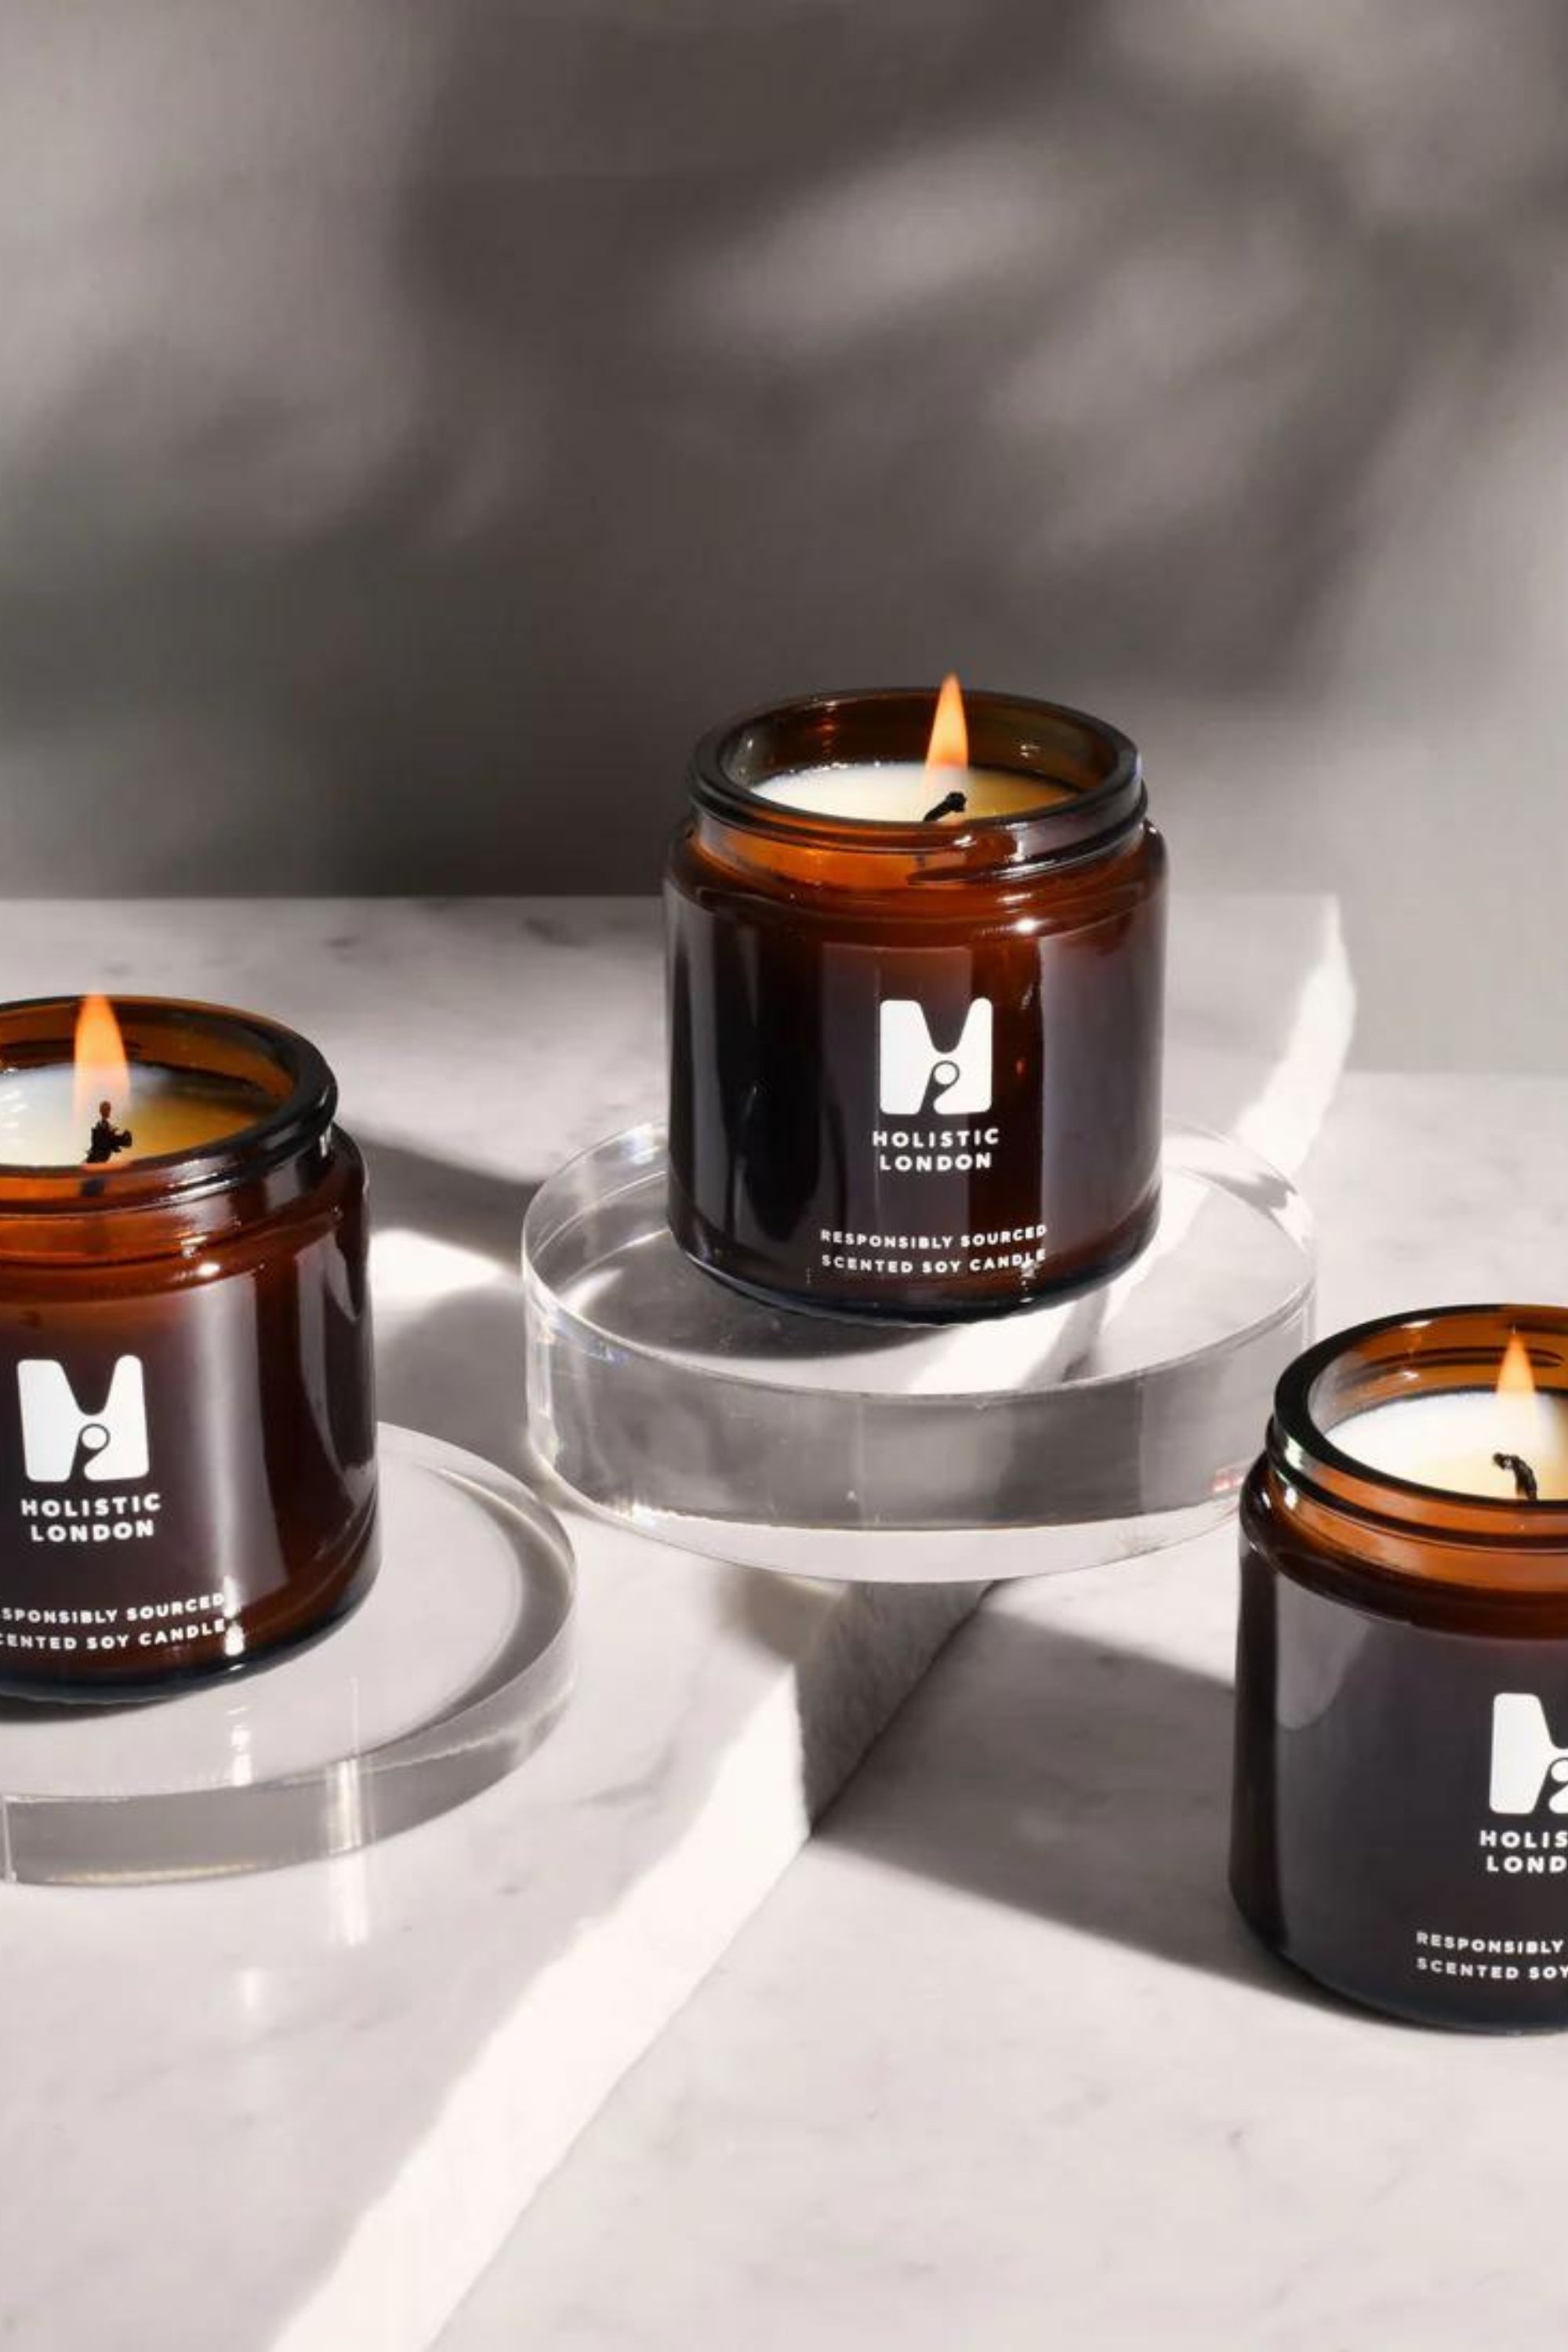 100% natural vegan cruelty free soy wax handcrafted sustainable essential oil blend candles with soothing effect to calm nerves, tension and treat anxiety, stress and insomnia, to unwind and relax. Made in London. 